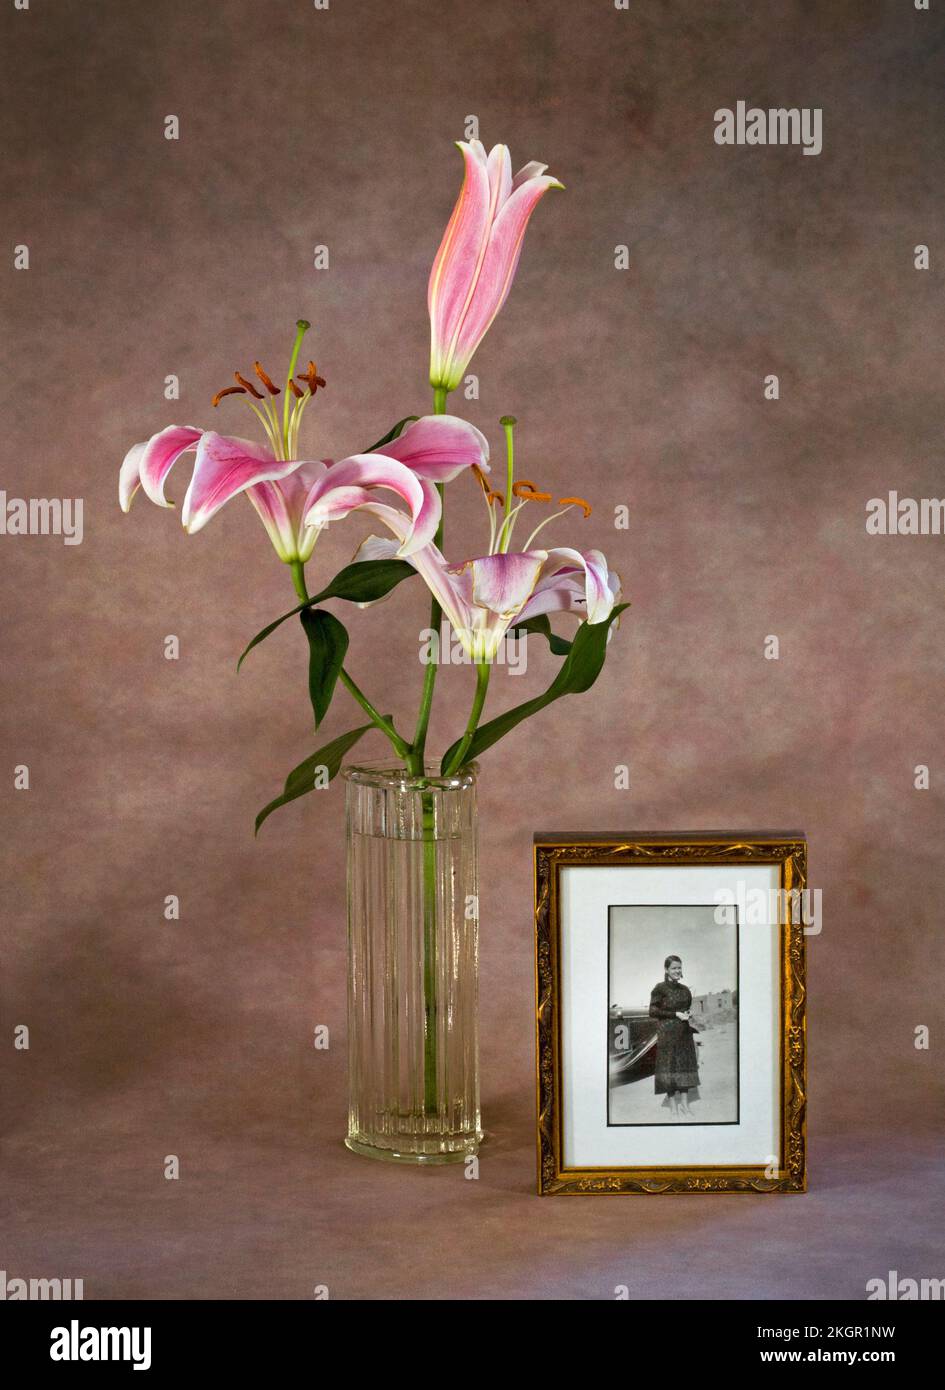 In Memory To Mom, with a lovely bouquet of Stargazer lilies in a vase. Stock Photo